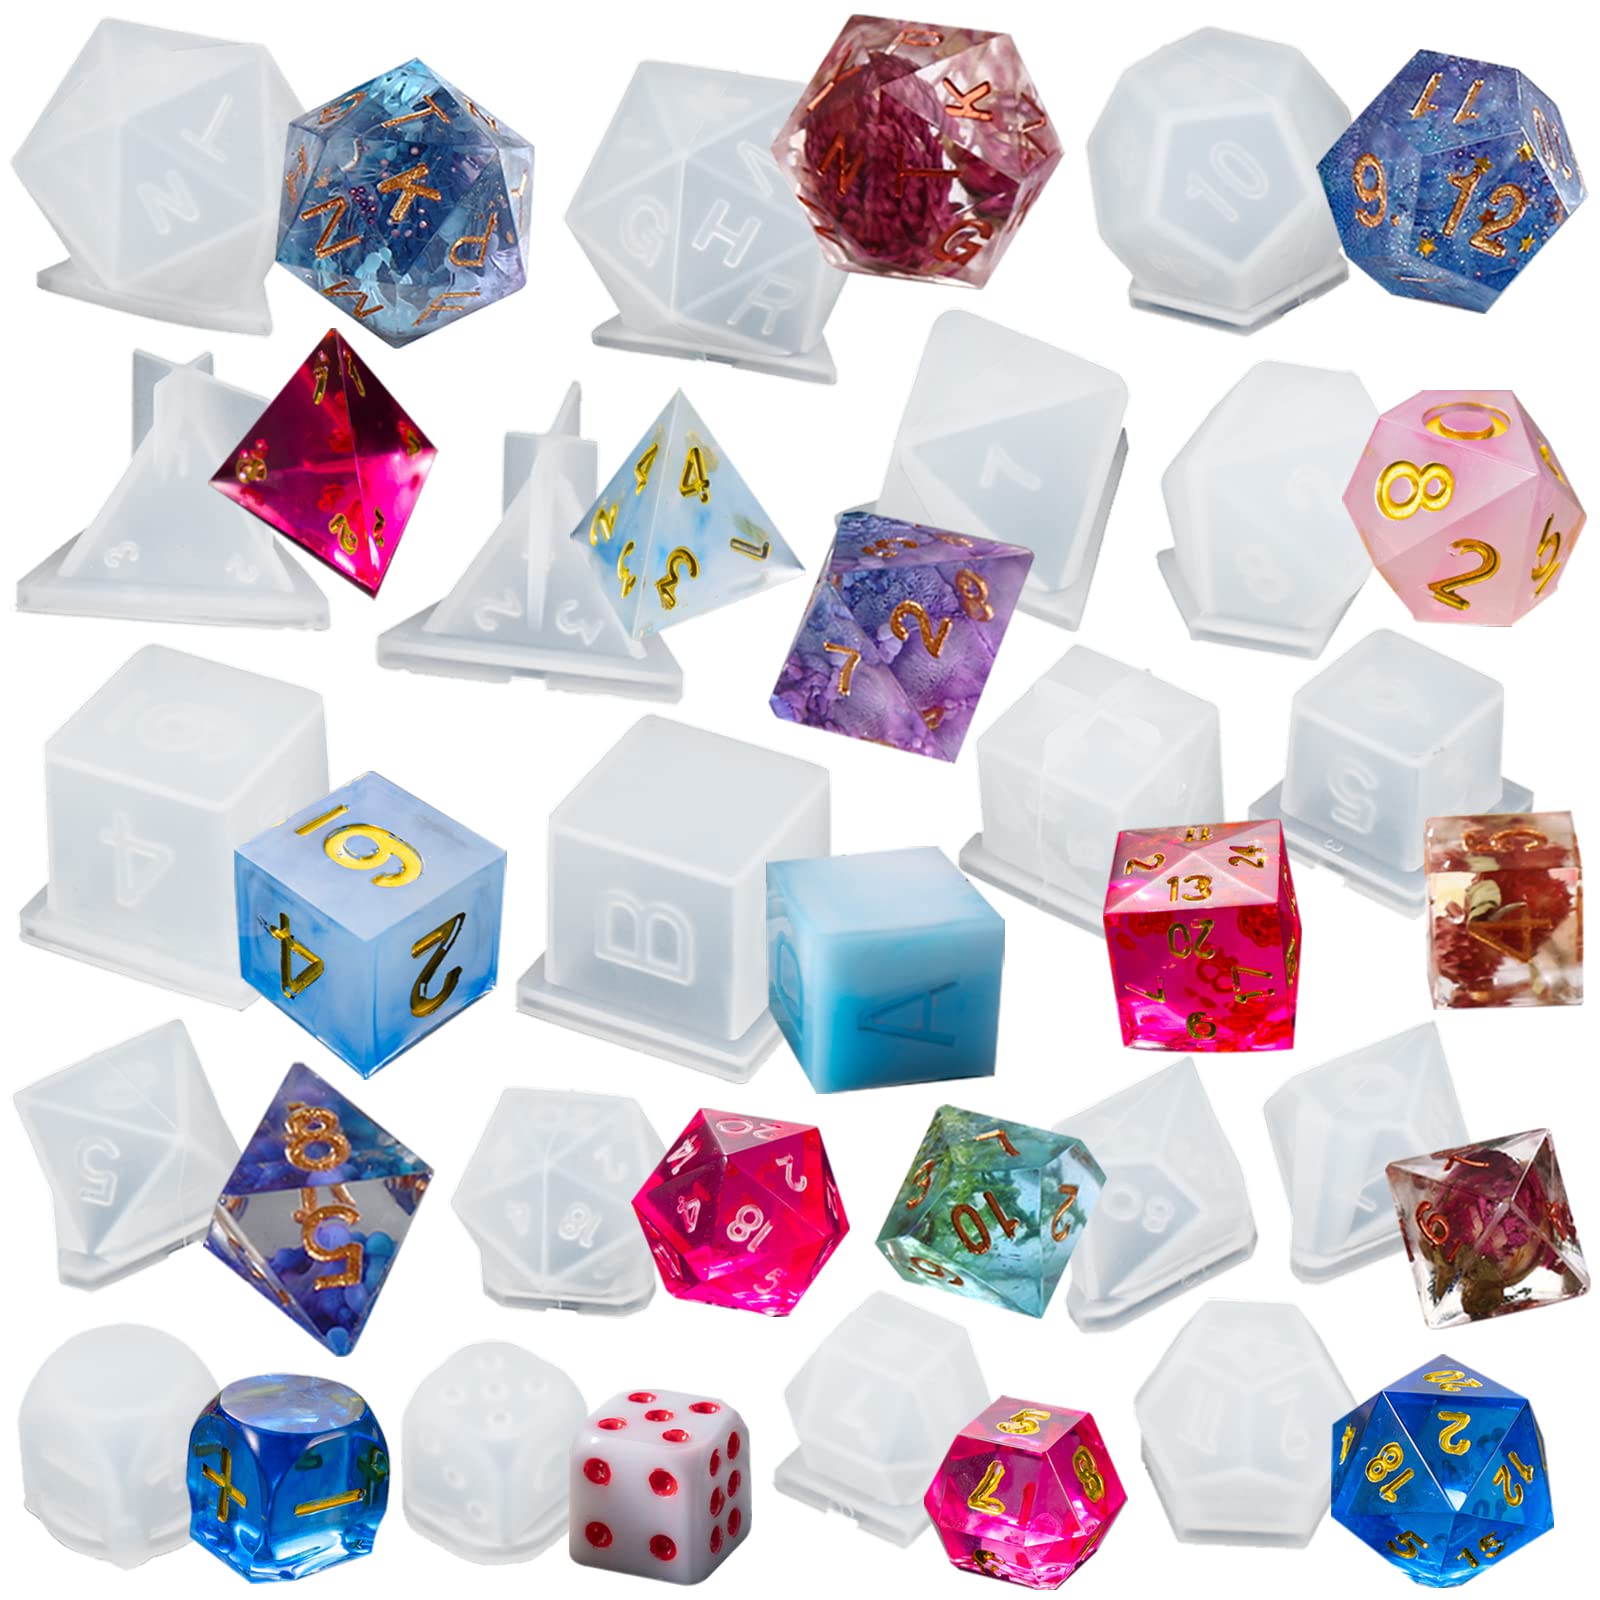 Dice Box Molds – Let's Resin